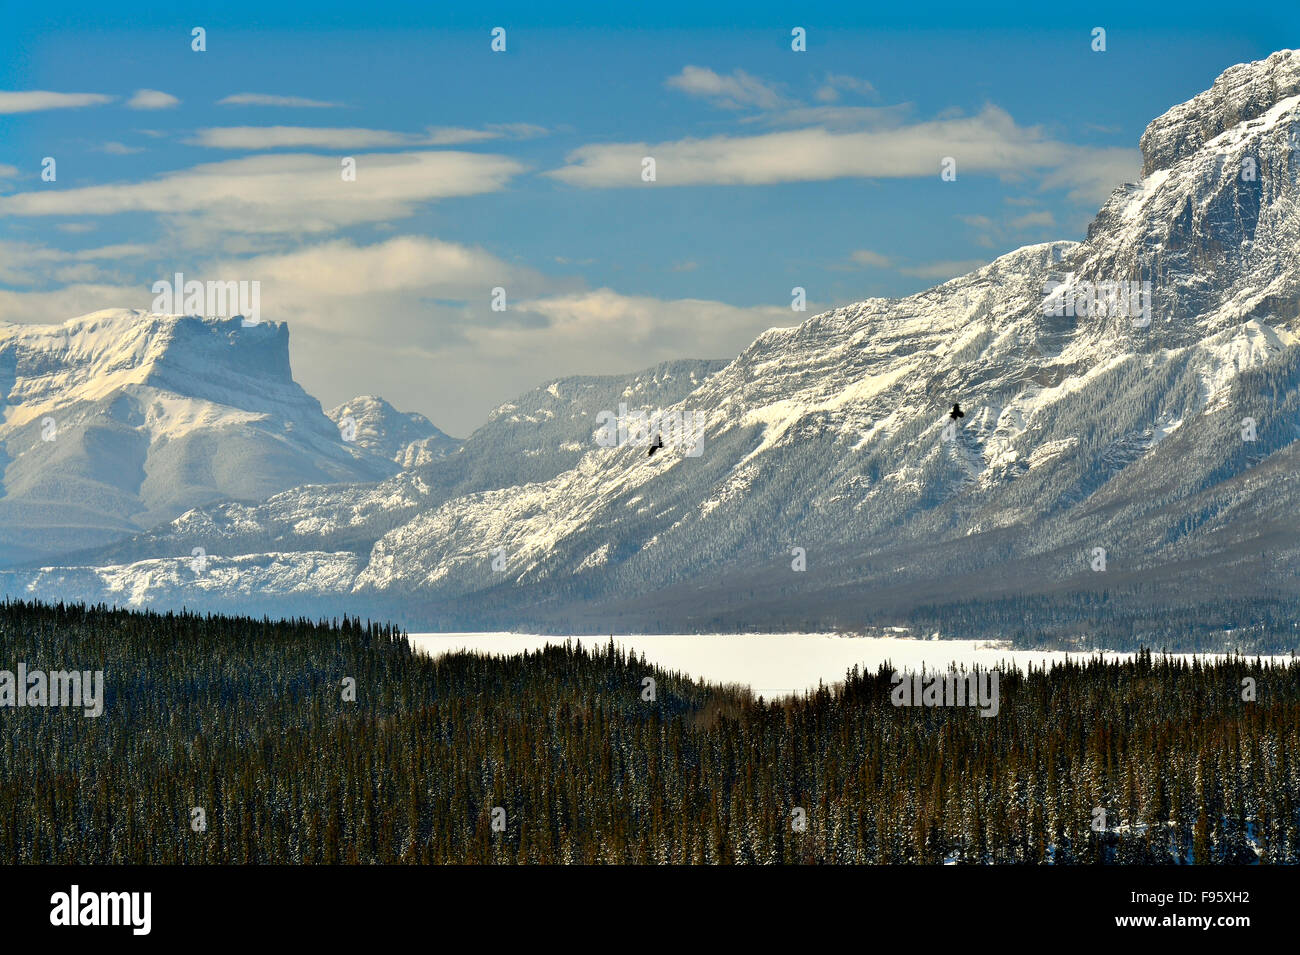 A winter landscape image captured at Brule of the snowcapped rocky mountains of western Alberta, Canada Stock Photo